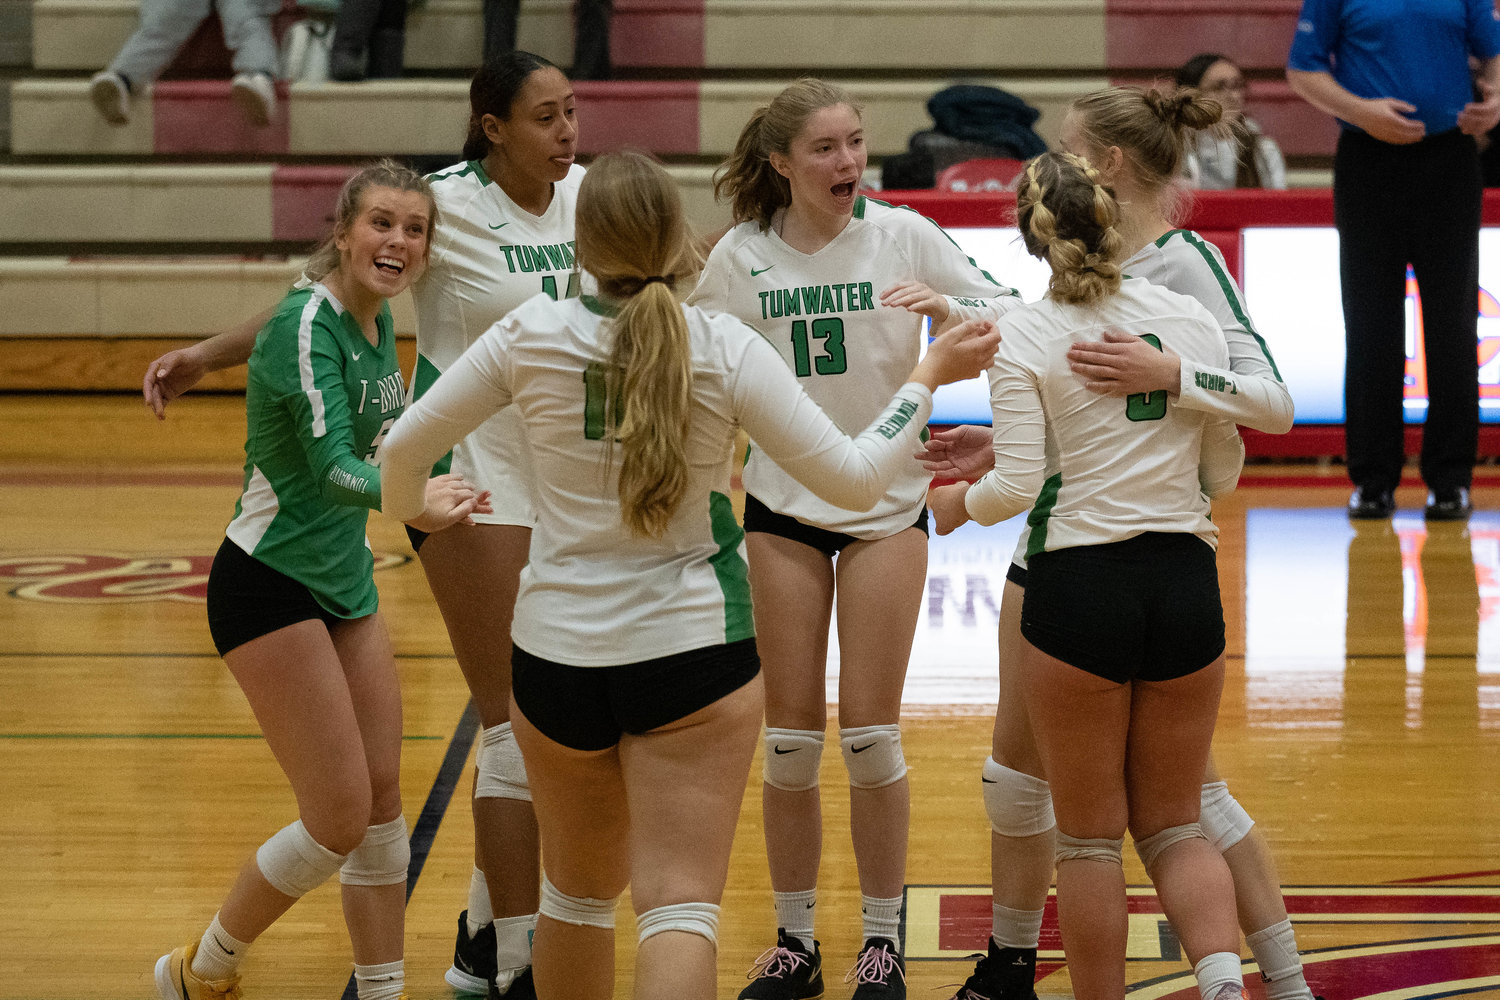 The Tumwater volleyball team celebrates after beating Hockinson in the first round of the 2A District 4 tournament at Myklebust Gym in Lower Columbia Community College Nov. 10.